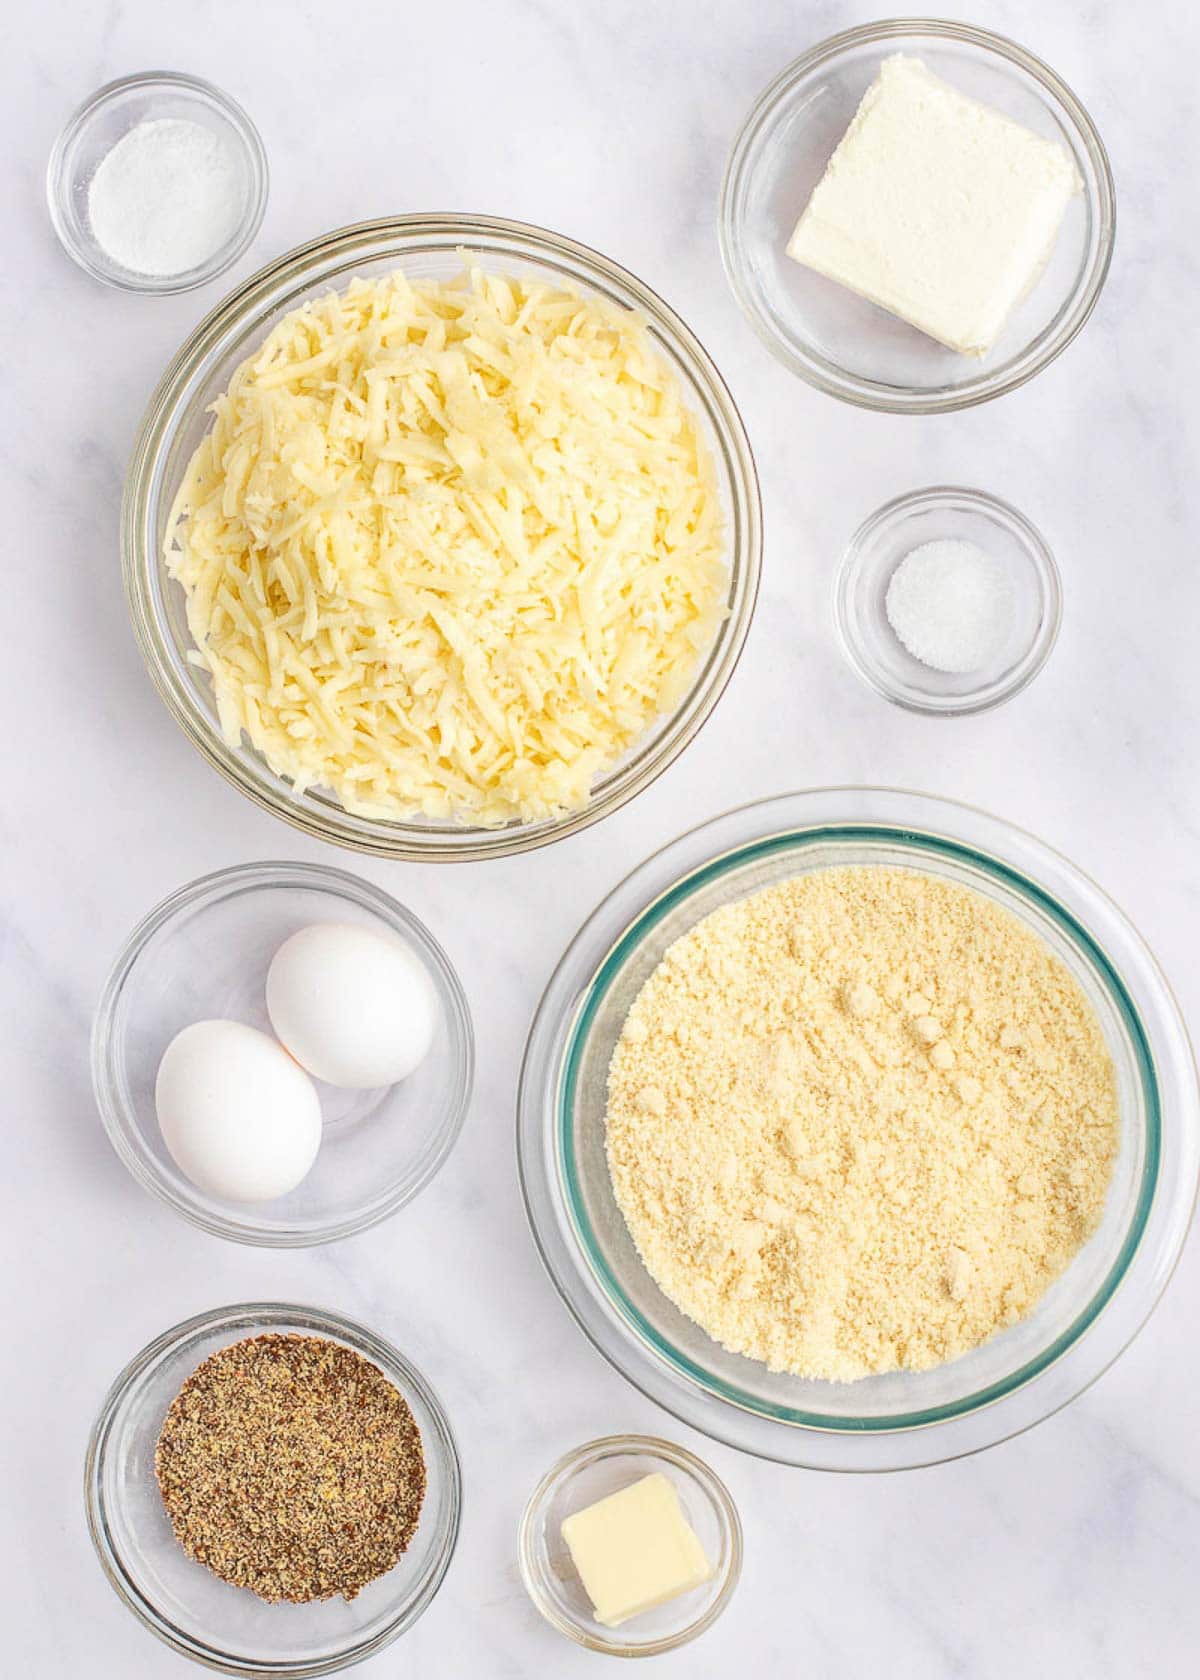 Overhead view of the ingredients needed for keto dinner rolls, in bowls: almond flour, flaxseed meal, shredded mozzarella cheese, whole eggs, cream cheese, butter, salt, and baking powder